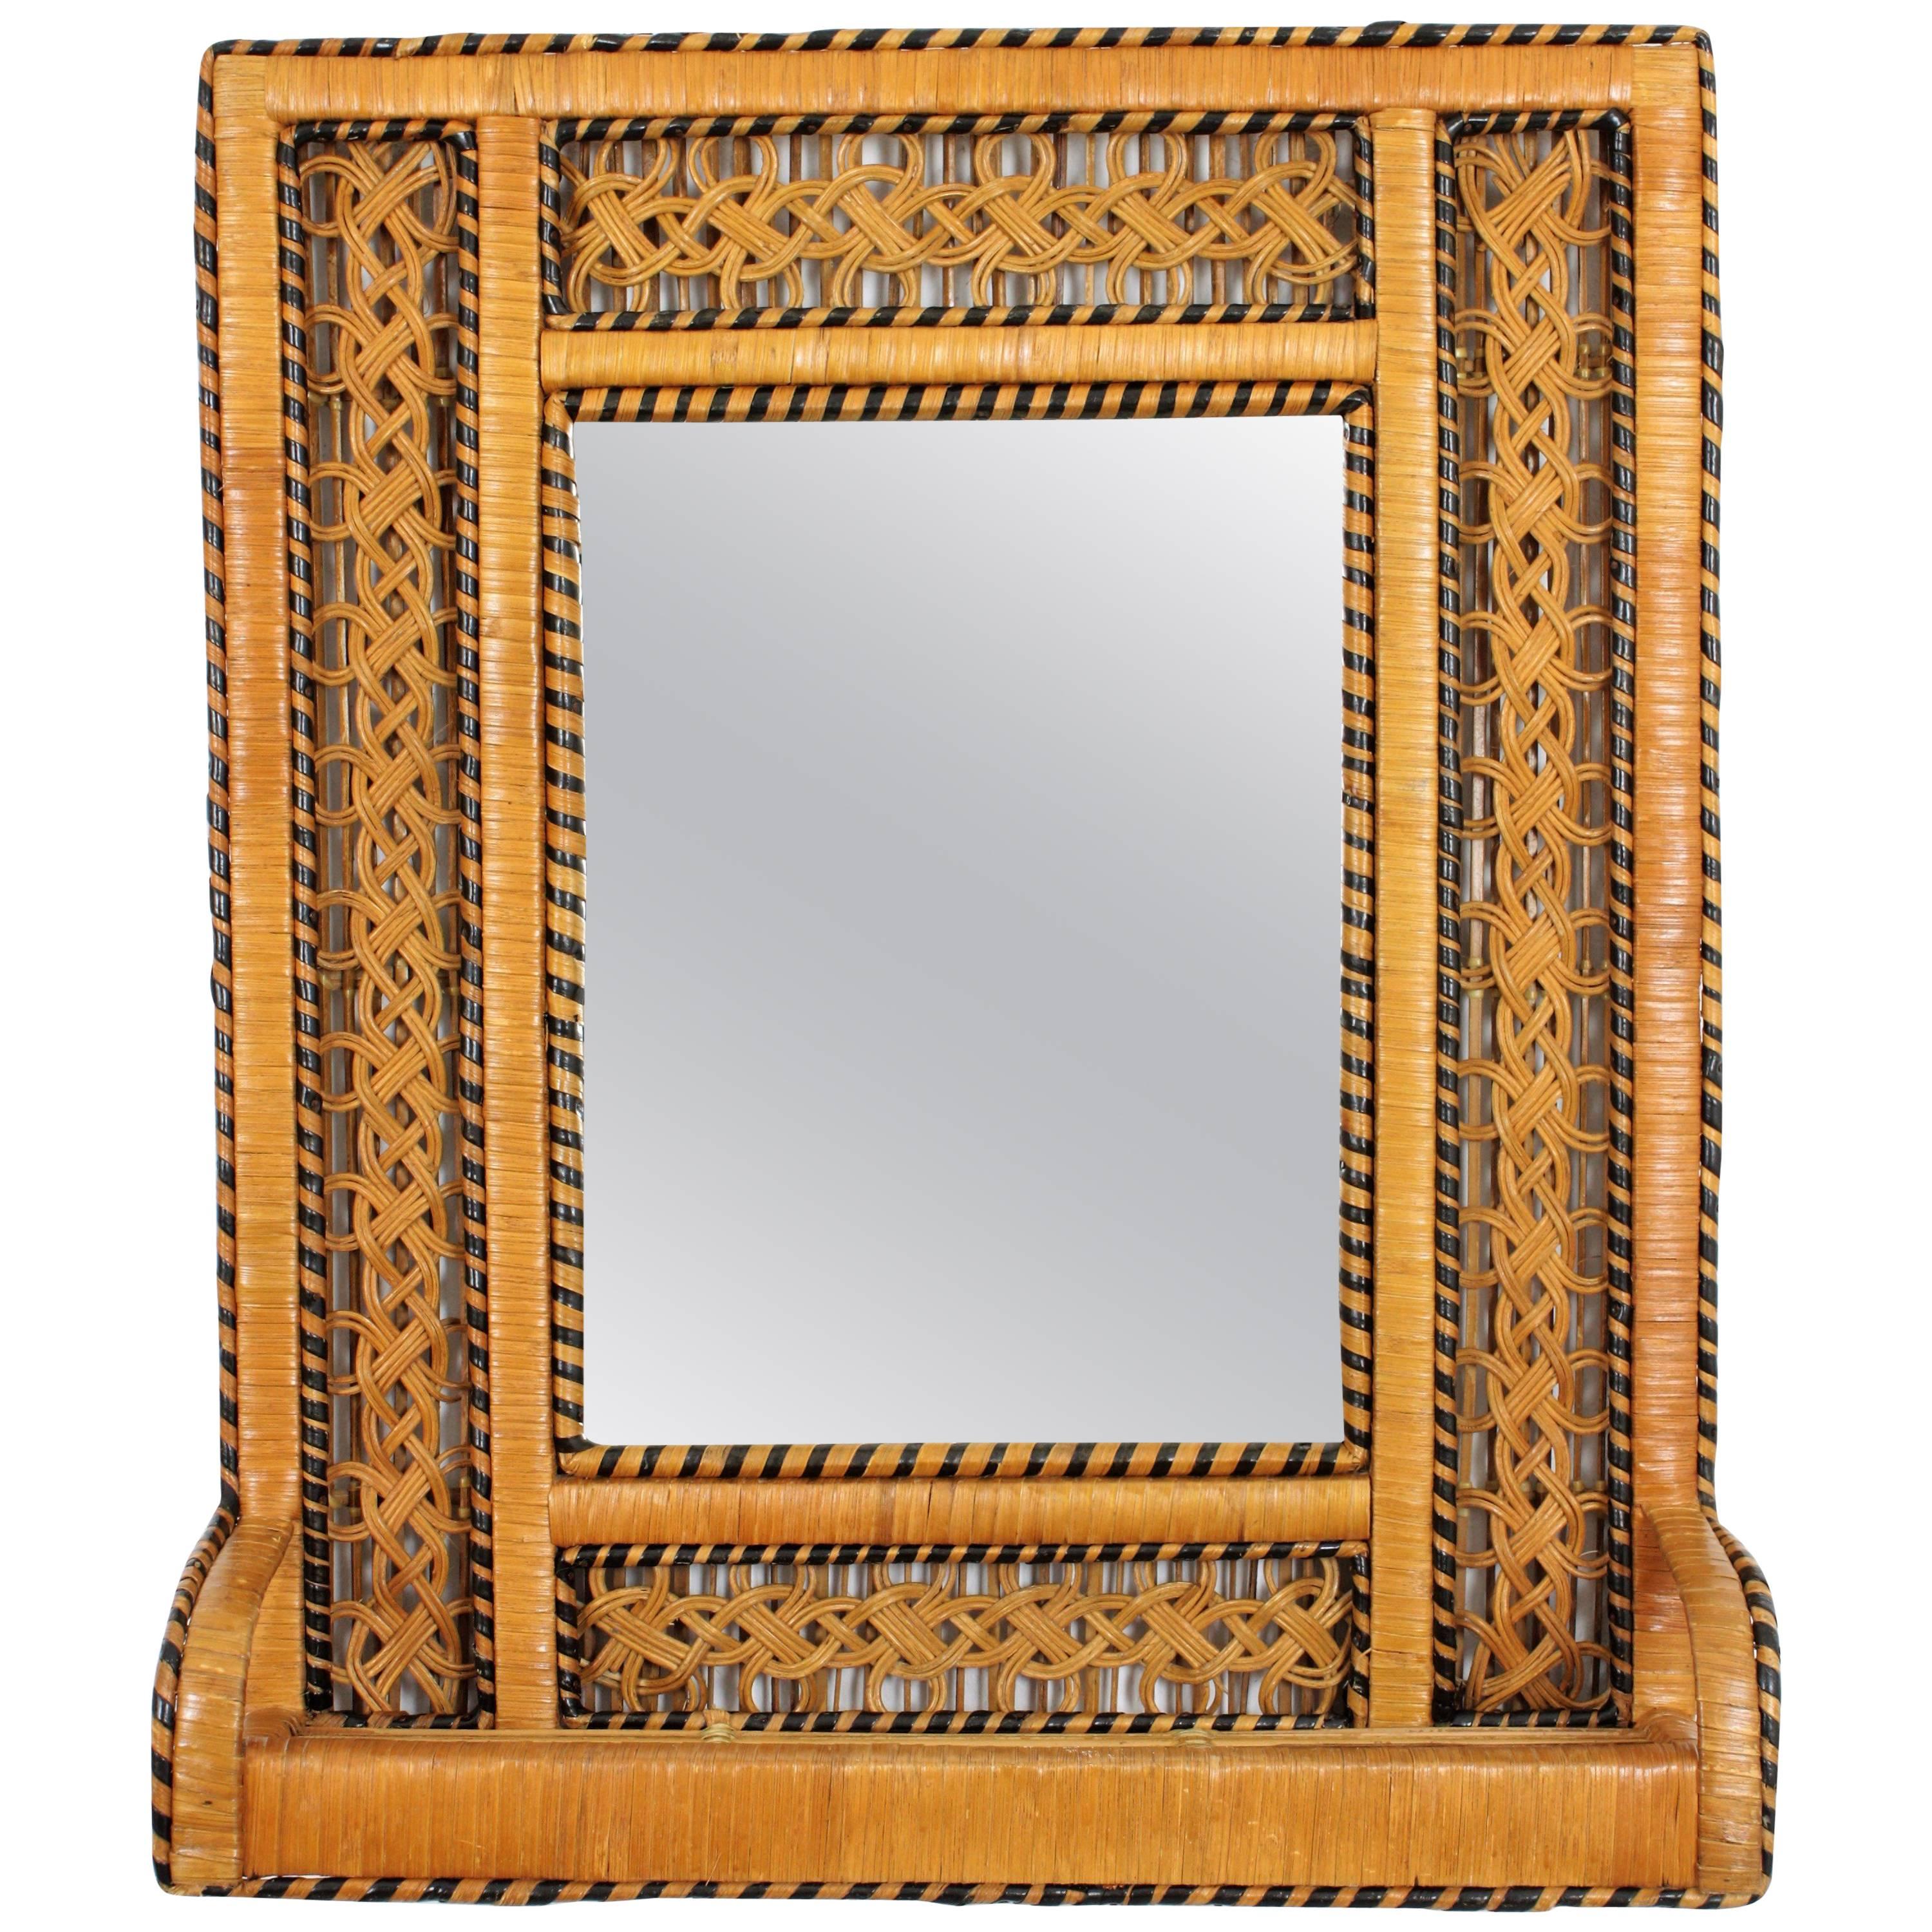 Rare Spanish handwoven bicolor rattan and wicker shelf mirror in the style of the Emmanuelle peacock chair.
The frame has a meticulous handcrafted work that makes this piece full of beautiful details.
Spain, circa 1970s.